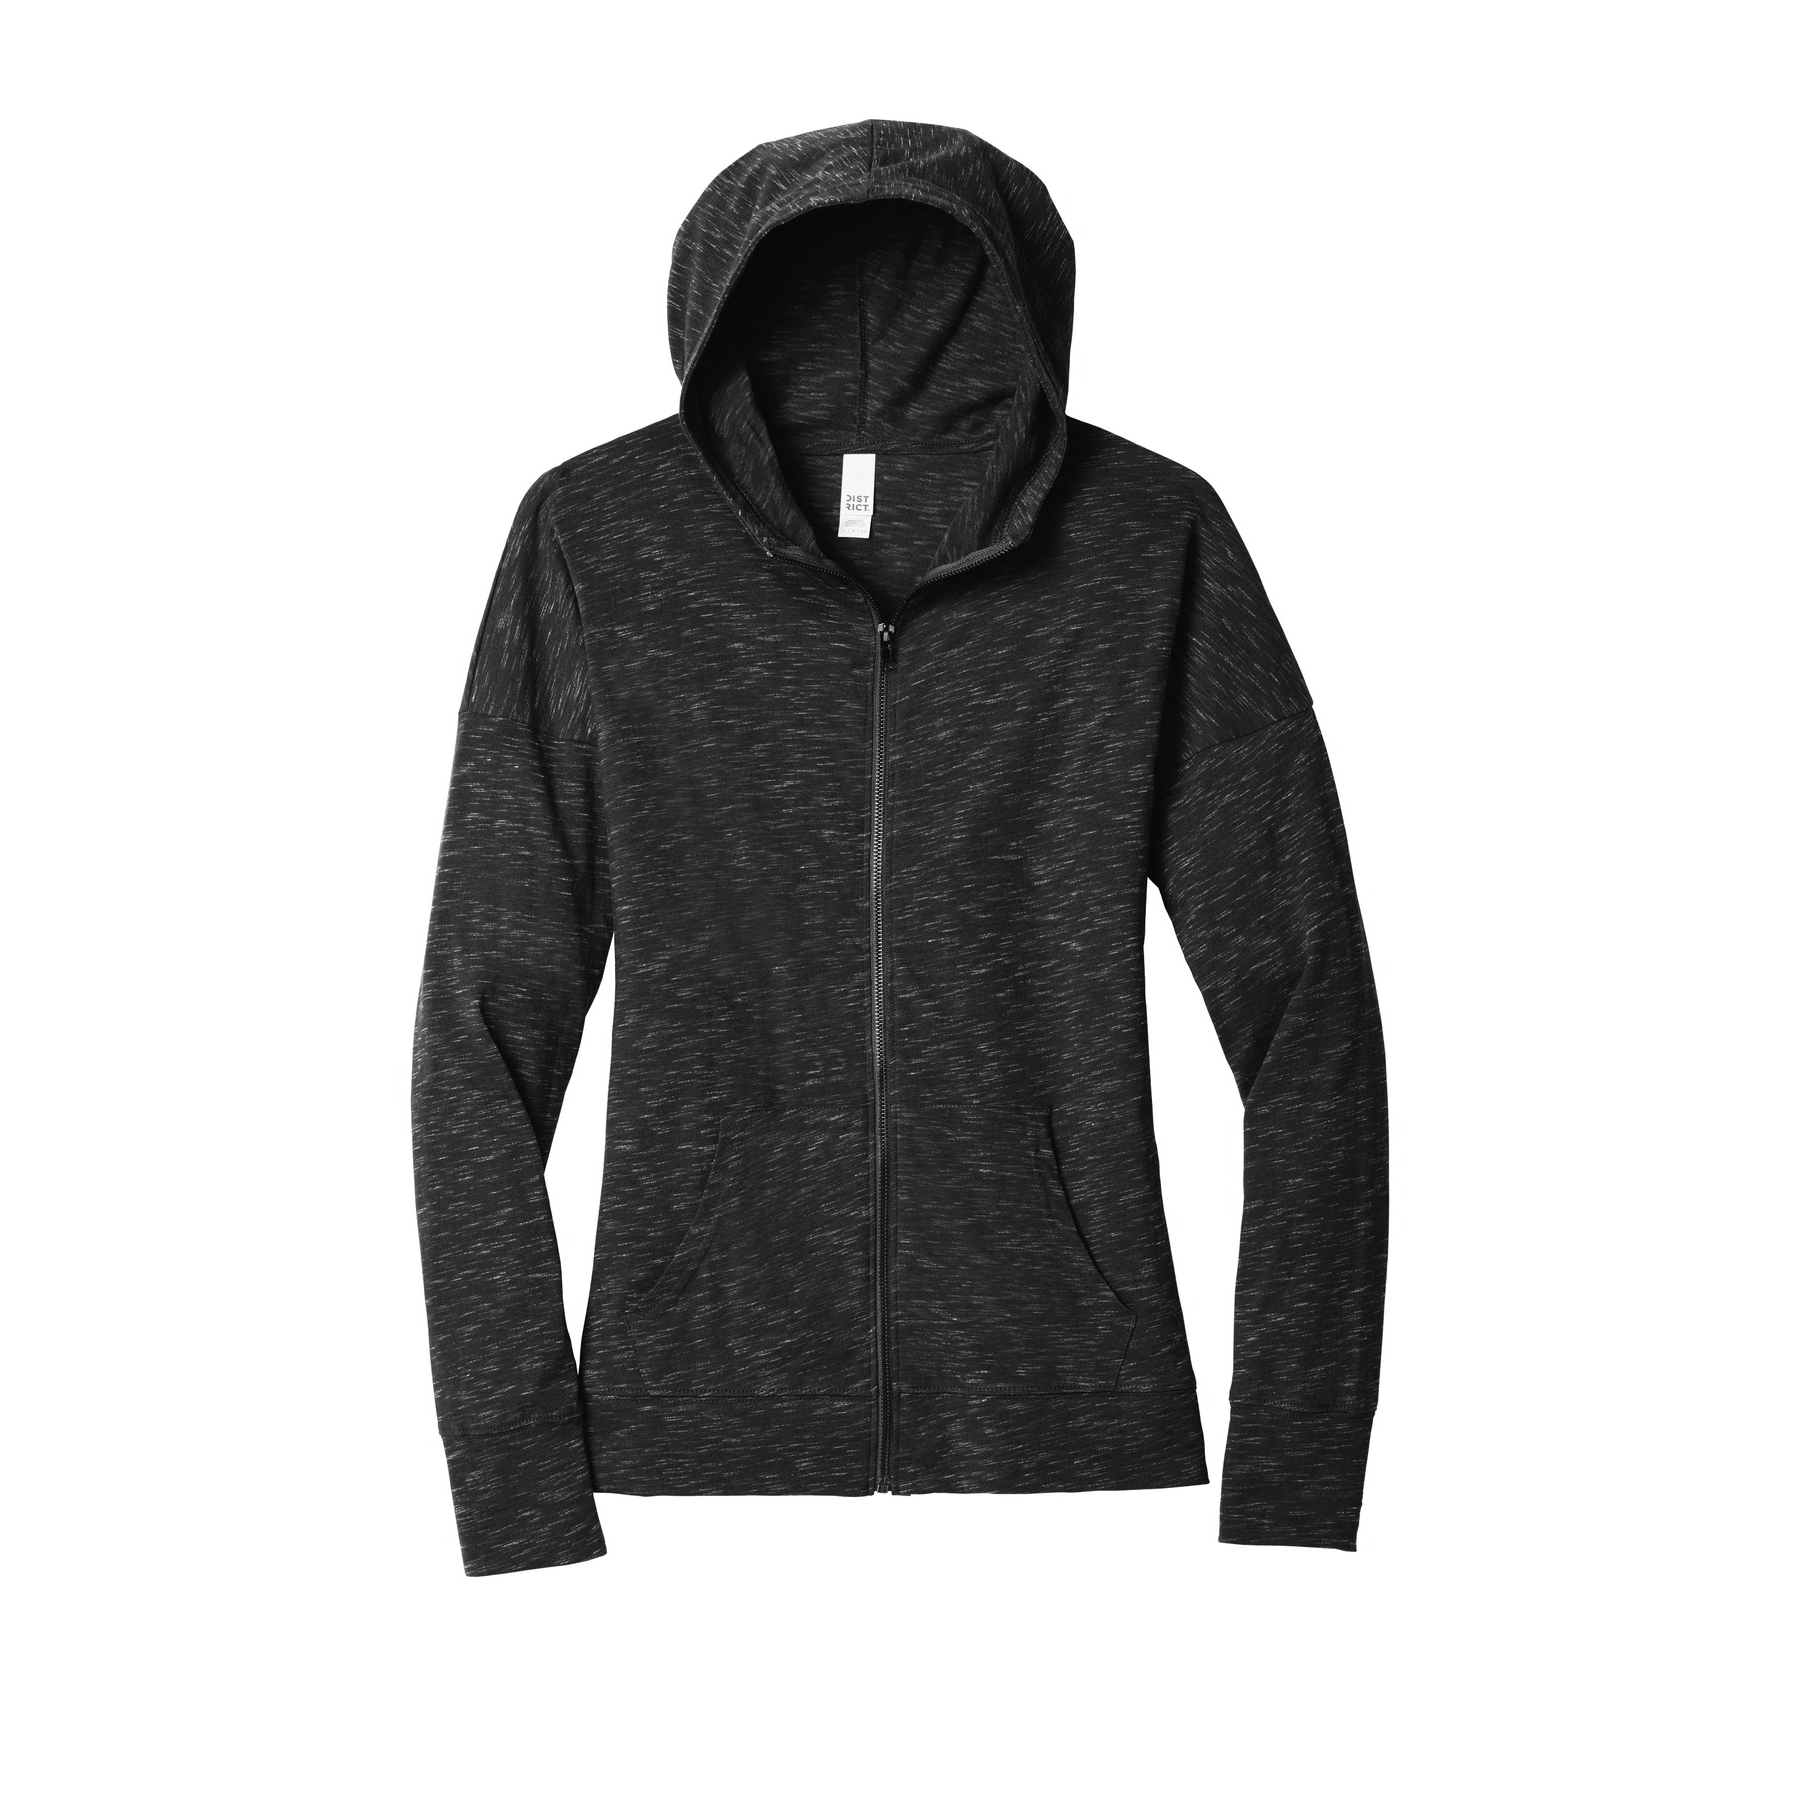 District ® Women's Medal Full-Zip Hoodie. DT665 | Colman and Company